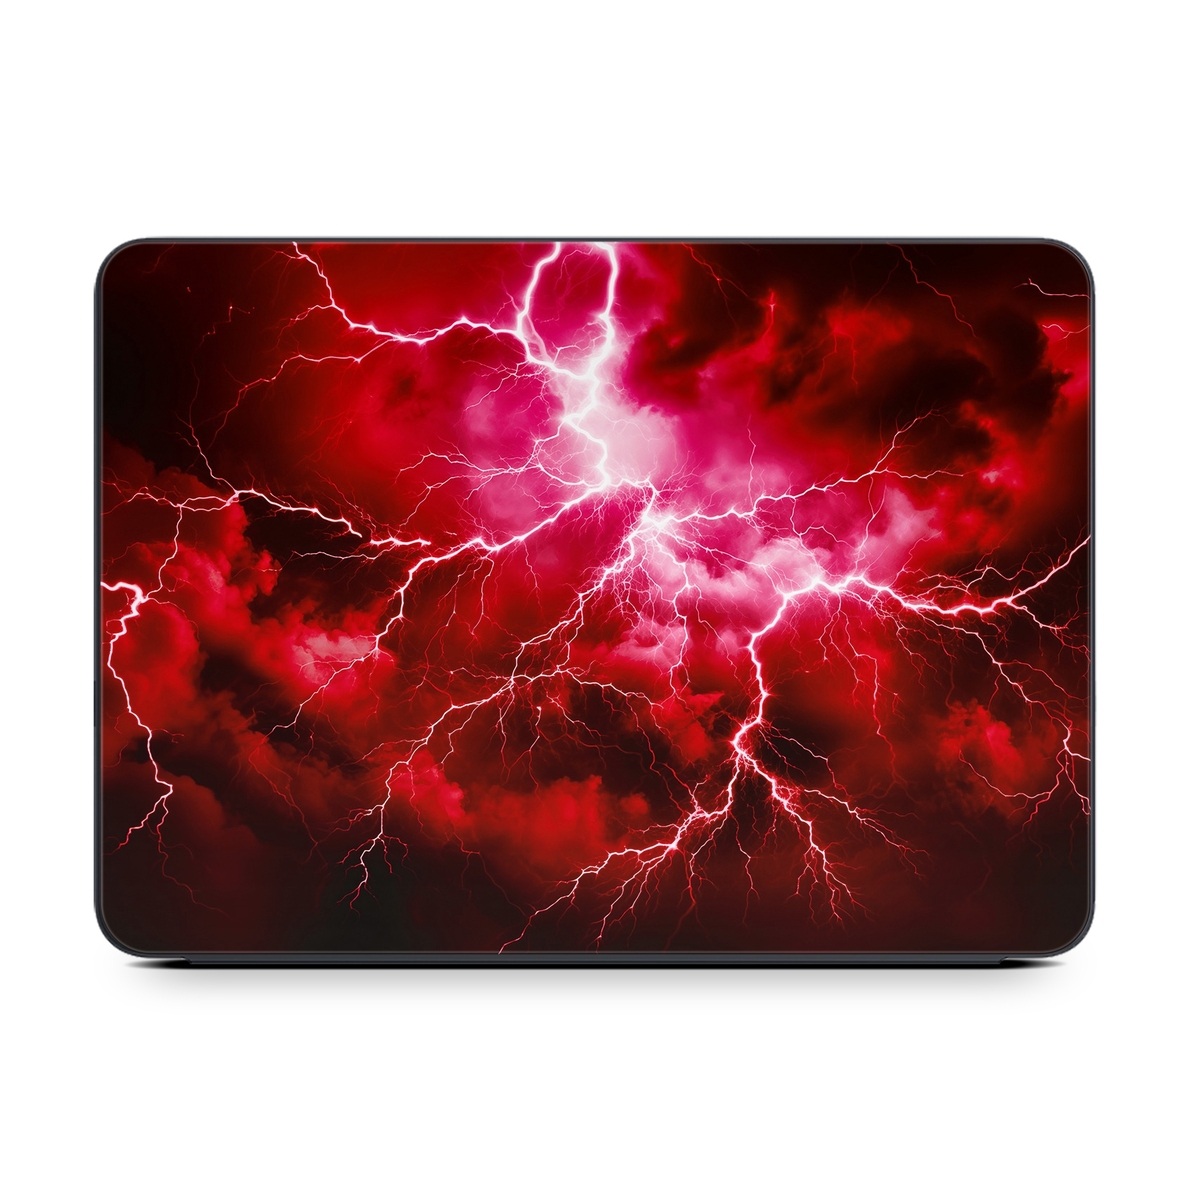  Skin design of Thunder, Atmosphere, Sky, Light, Purple, Lighting, Water, Thunderstorm, Electricity, Pink, with black, red colors